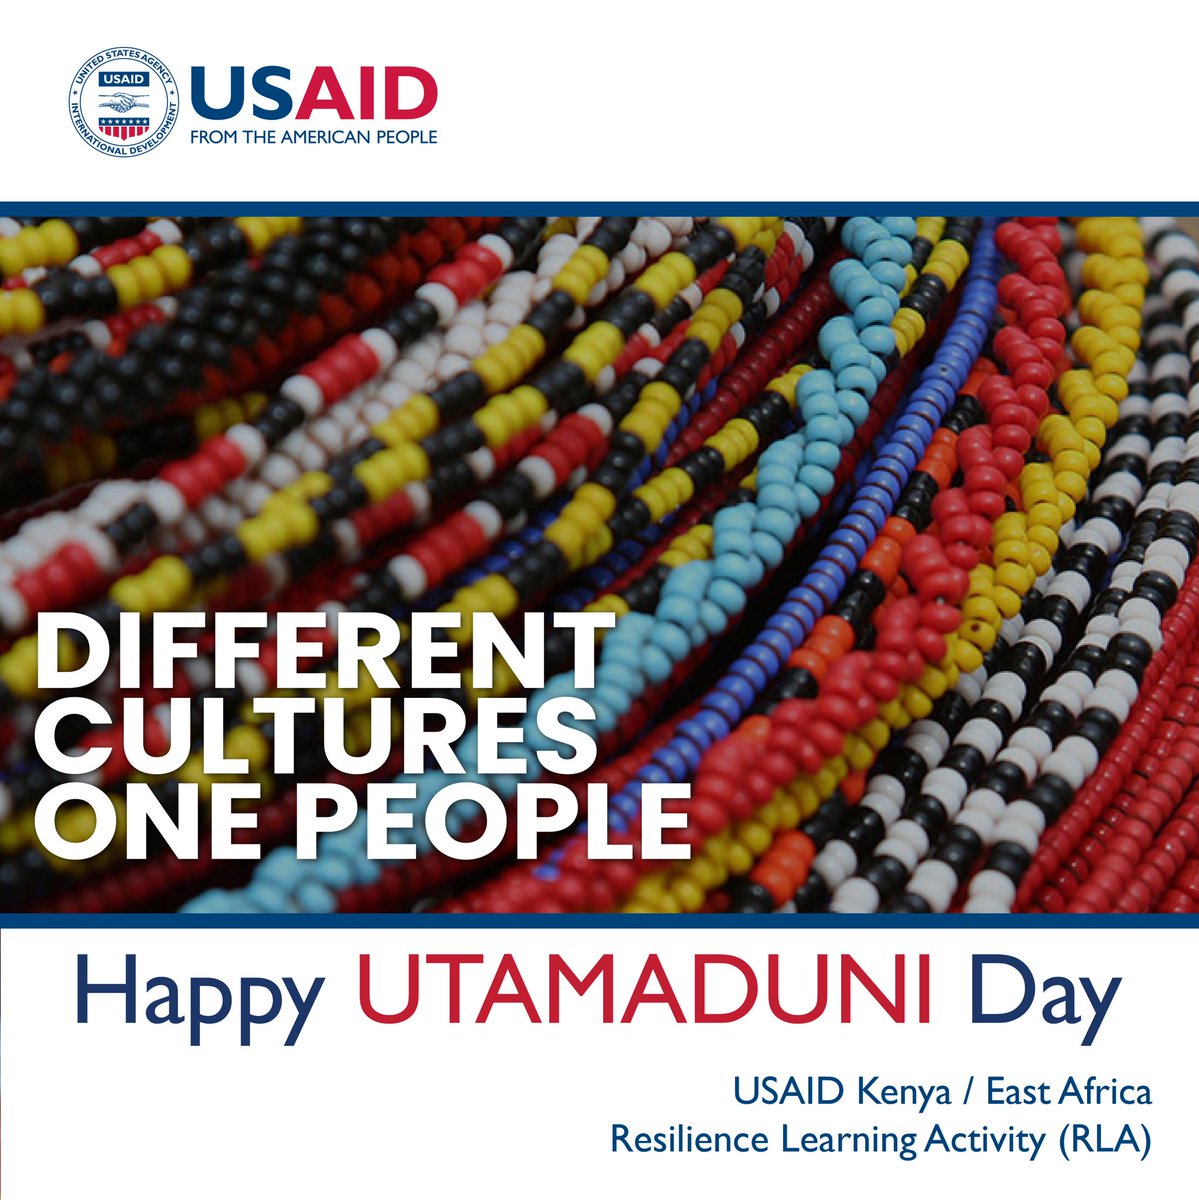 From our team #HappyUtamaduniday